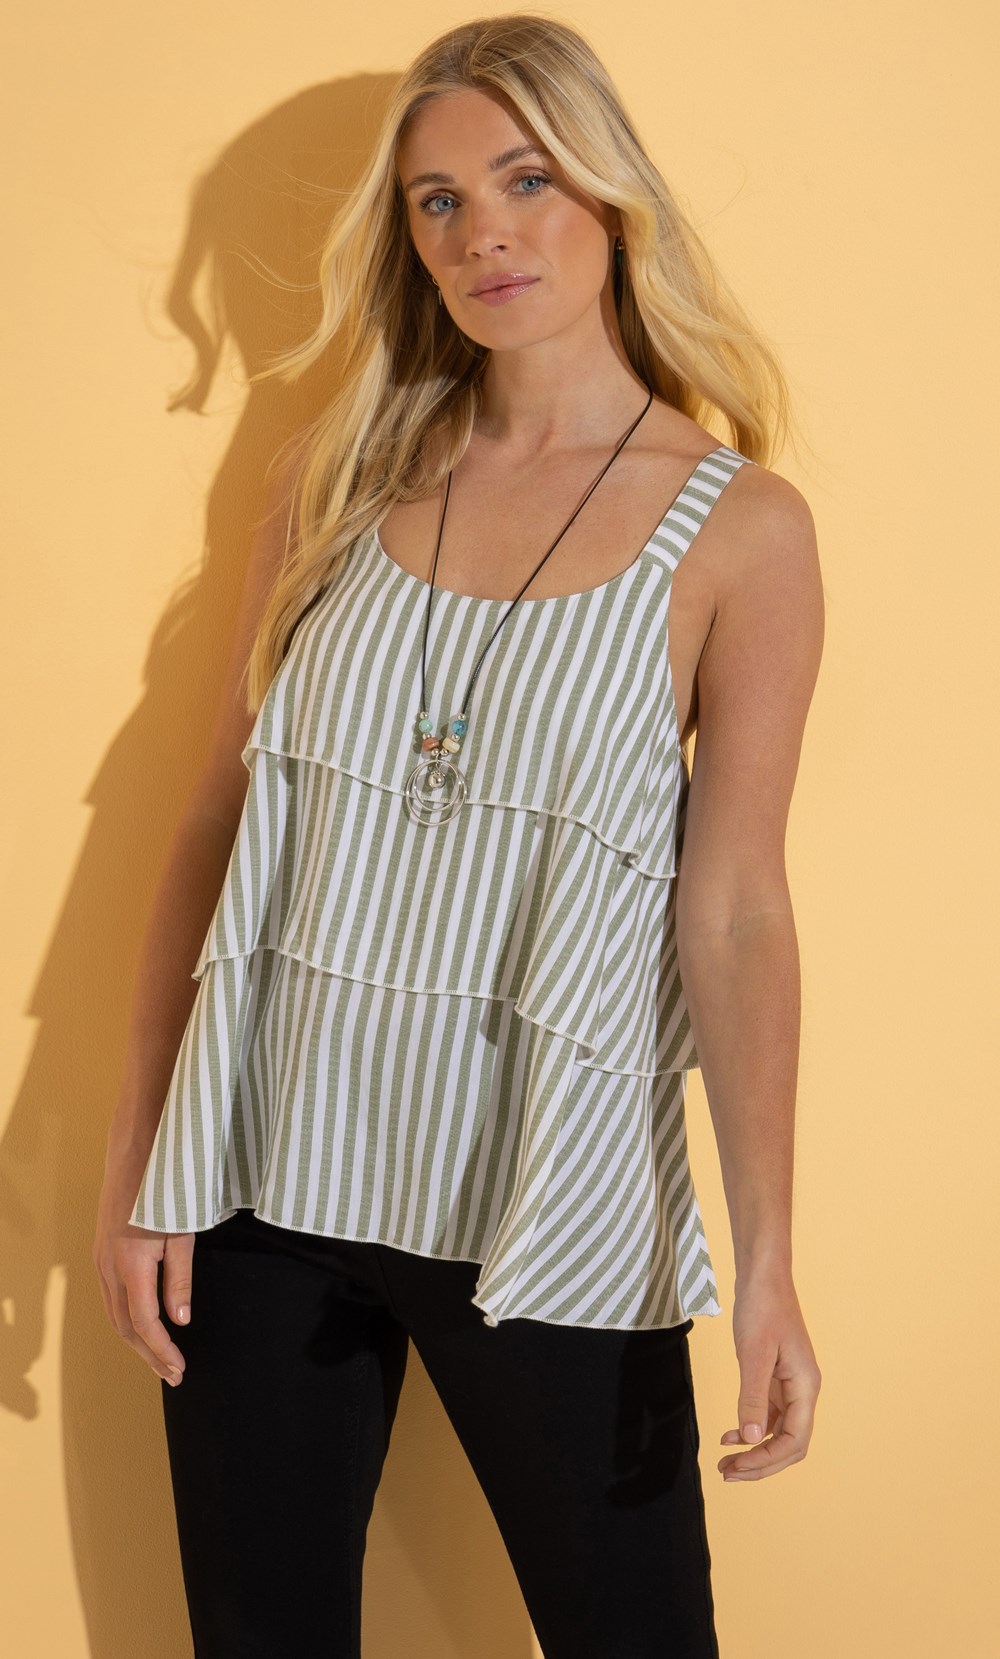 Brands - Klass Tiered Striped  Strappy Top With Necklace White/Khaki Women’s